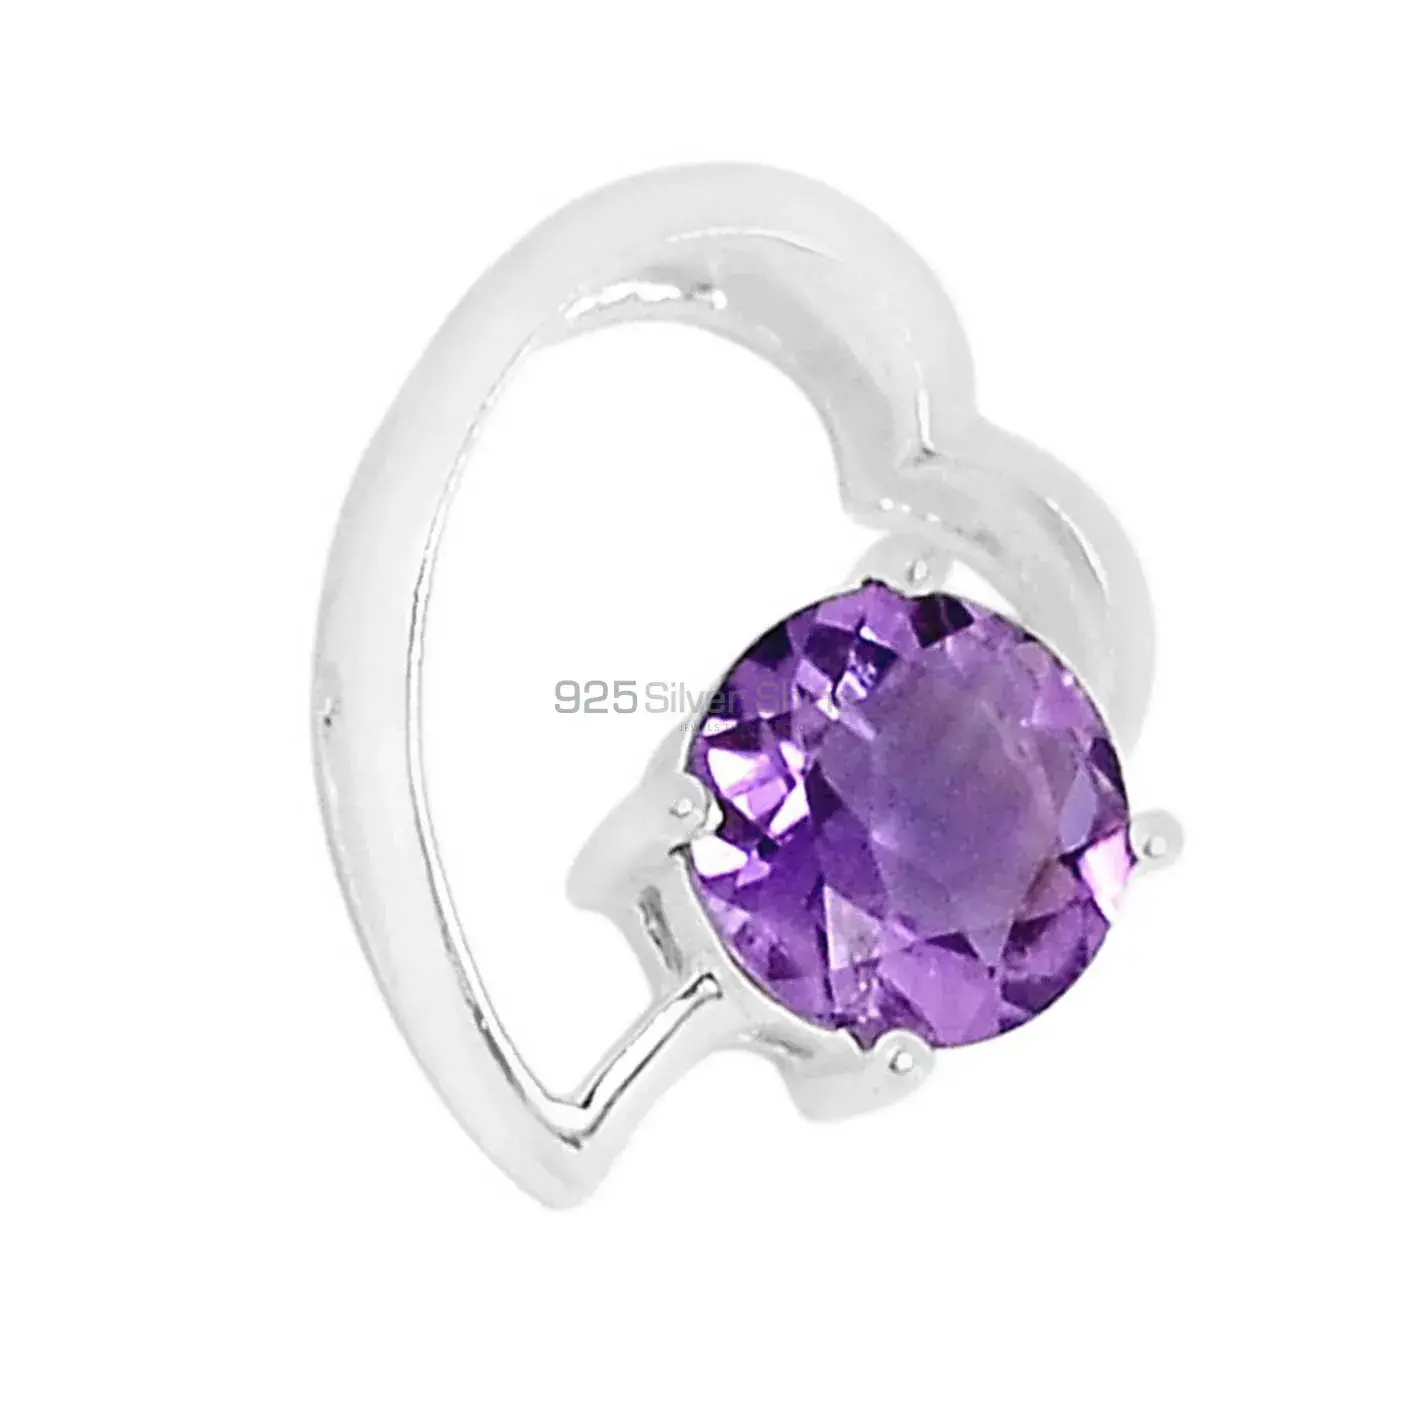 Top Quality Amethyst Gemstone Pendants Exporters In 925 Solid Silver Jewelry 925SSP310-1_0